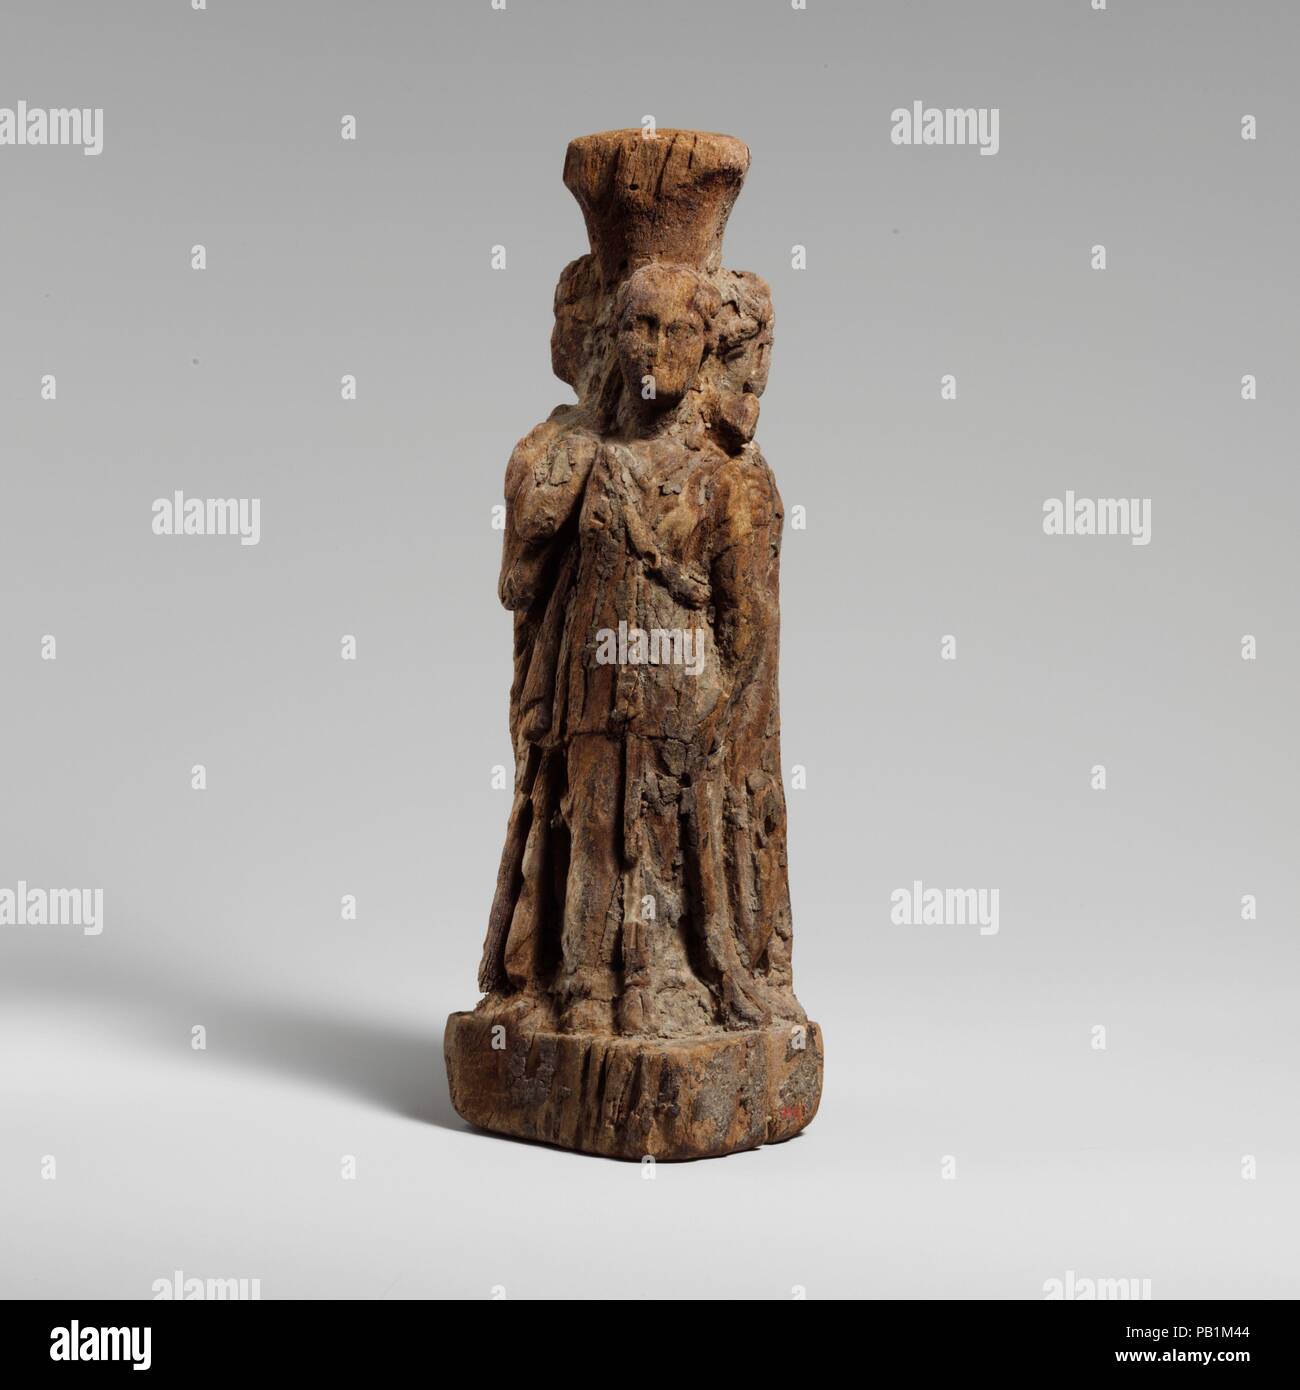 Wood statuette of Hekate. Culture: Egyptian, Ptolemaic. Dimensions: H.: 9 3/16 in. (23.4 cm). Date: 304-30 B.C..  Carved out of juniper wood, the statuette was originally painted. Museum: Metropolitan Museum of Art, New York, USA. Stock Photo